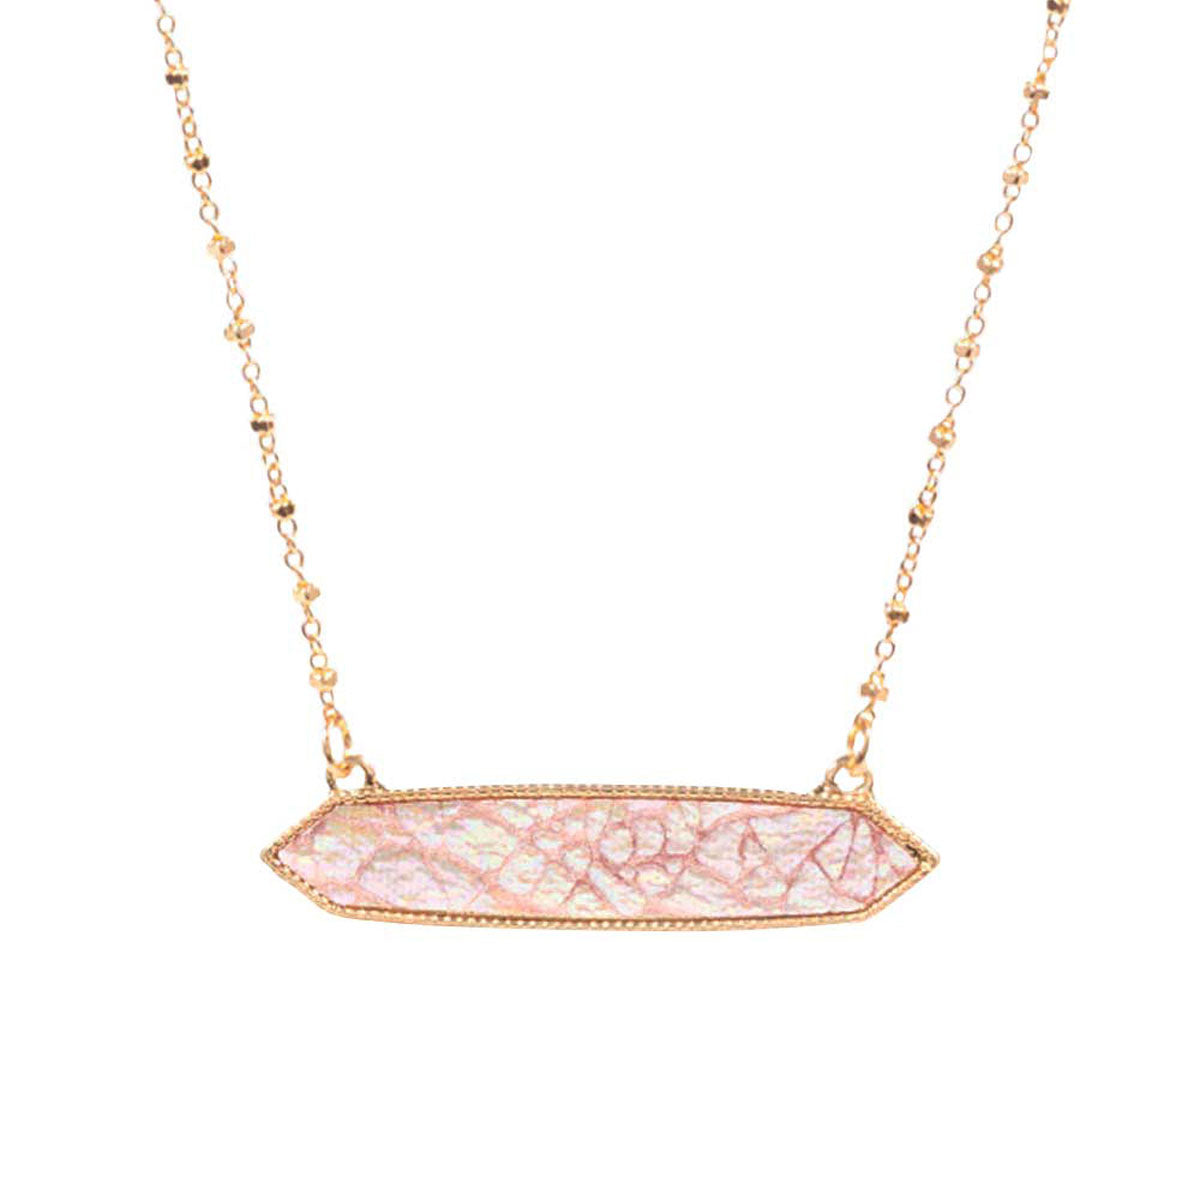 Pink Trendy Patterned Hexagon Pendant Necklace. Designed to accent the neckline, a fashion faithful, adds a gorgeous stylish glow to any outfit style, jewelry that fits your lifestyle! Adds a touch of beautiful inspired beauty to your look. Fabulous gift, ideal for your loved one or yourself. Perfect Birthday gift, friendship day, Mother's Day, Graduation Gift.